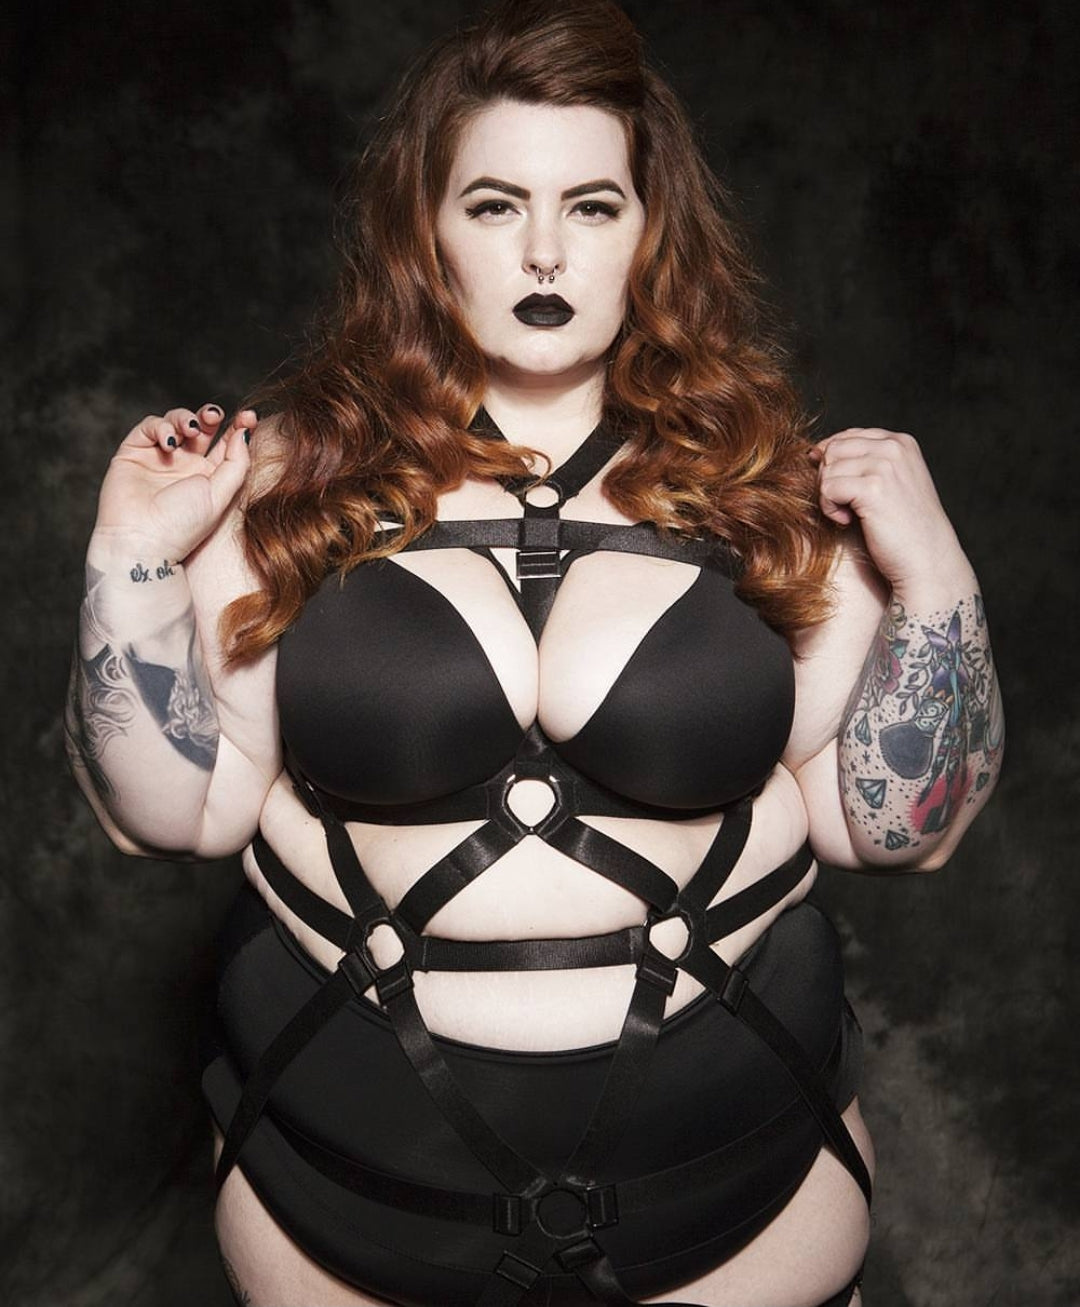 Blackmass full body black harness - by Teale Coco – Tealecoco